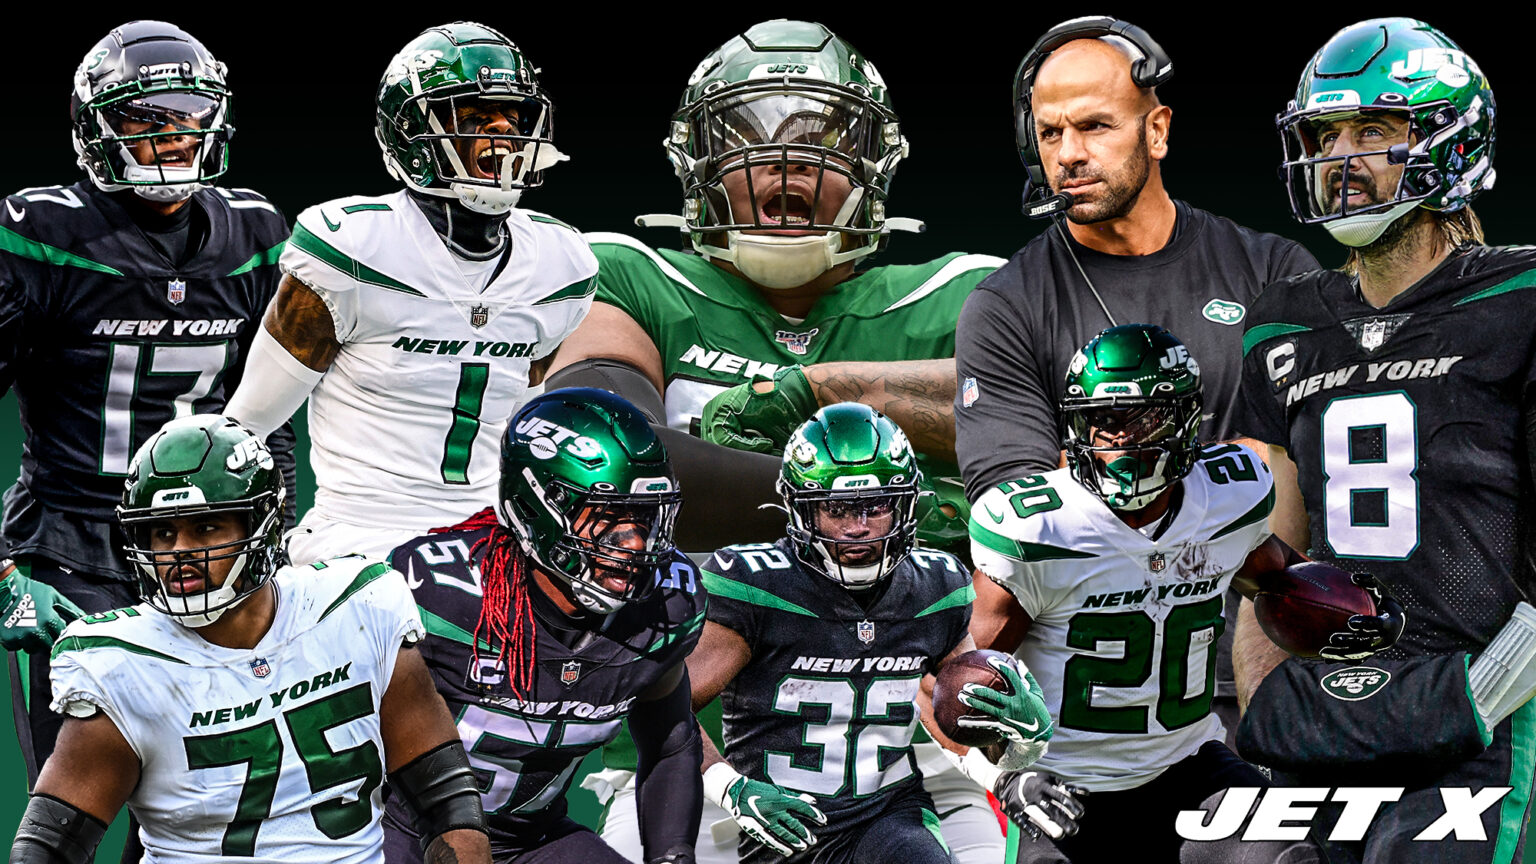 New York Jets Depth Chart Projected 53man roster (precamp)